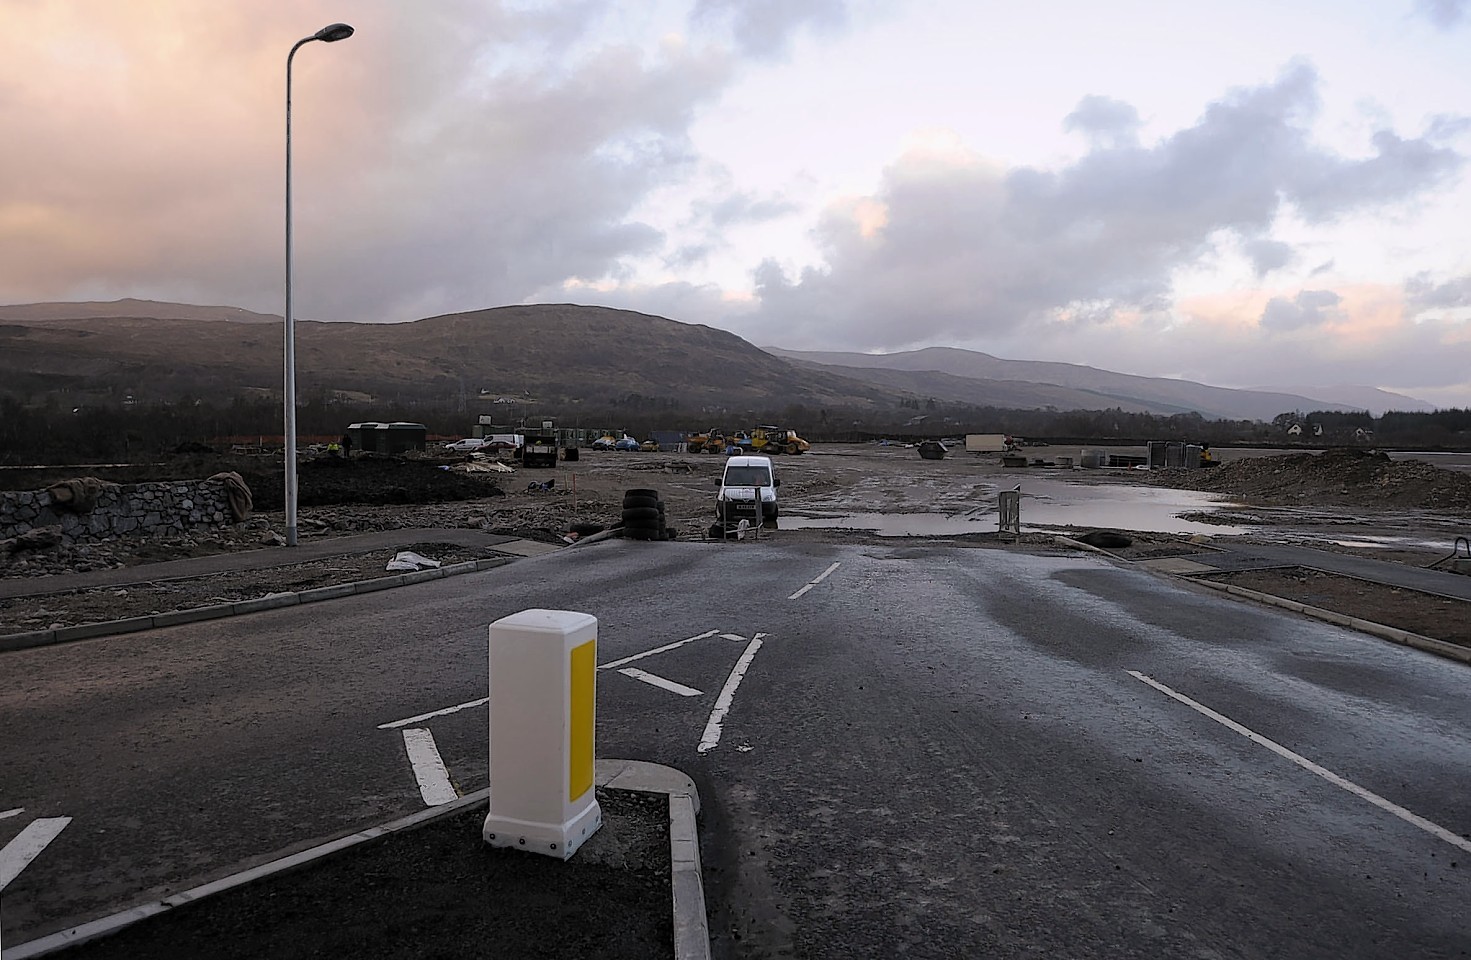 The Tesco-owned Blar Mhor site in Fort William